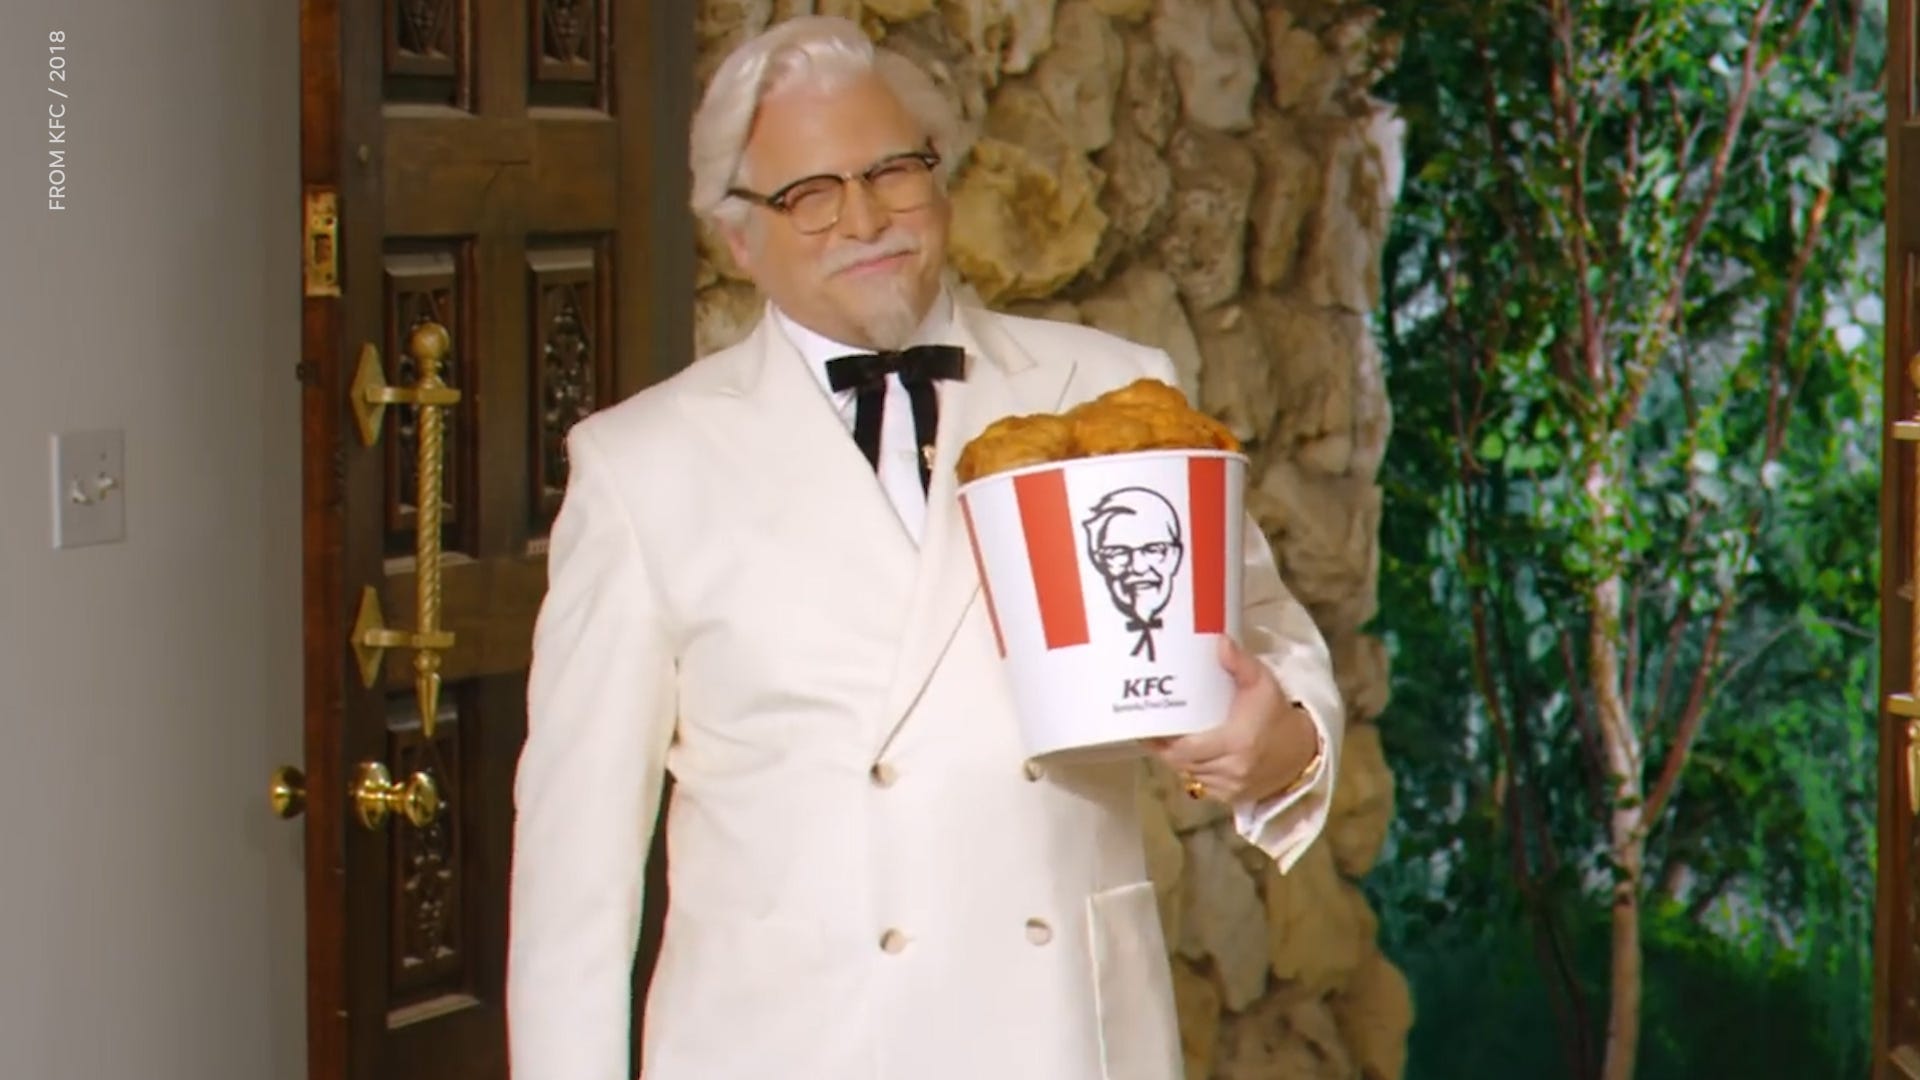 colonel sanders wallpapers wallpaper cave on colonel sanders wallpapers